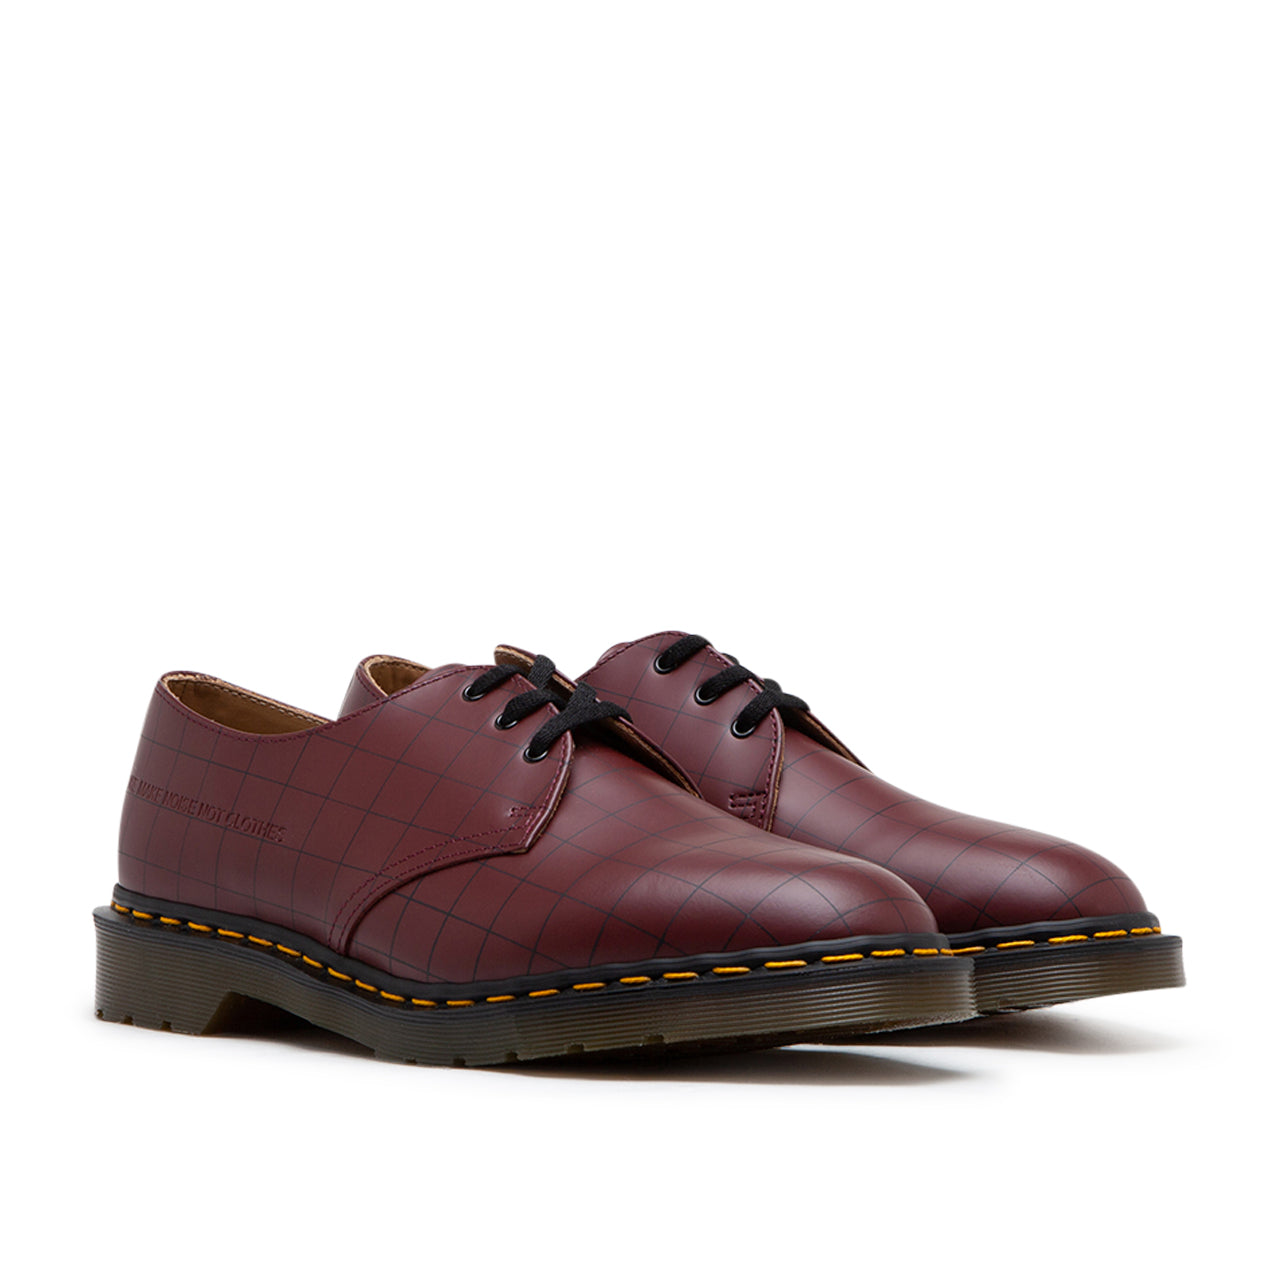 Dr. Martens x Undercover 1461 Check Smooth (Rot)  - Cheap Juzsports Jordan Outlet